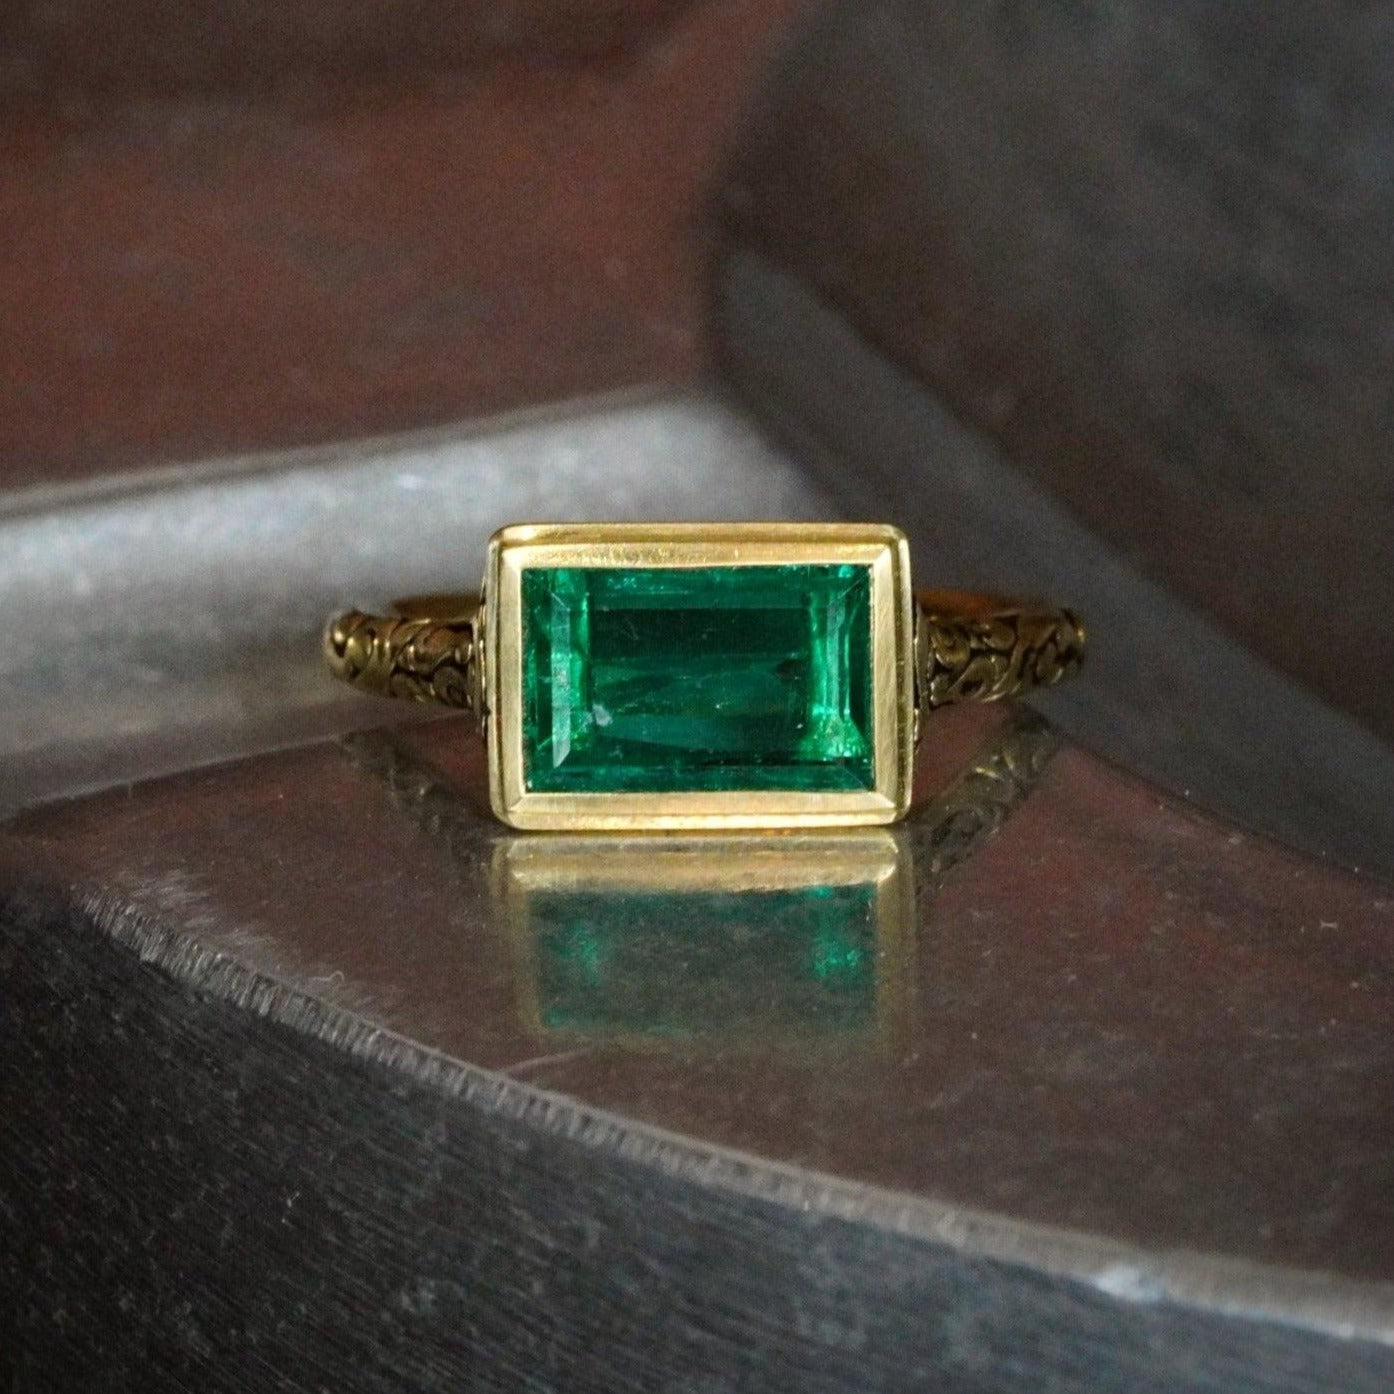 Anup Jogani's masterpiece: Renaissance romance in a Colombian emerald ring